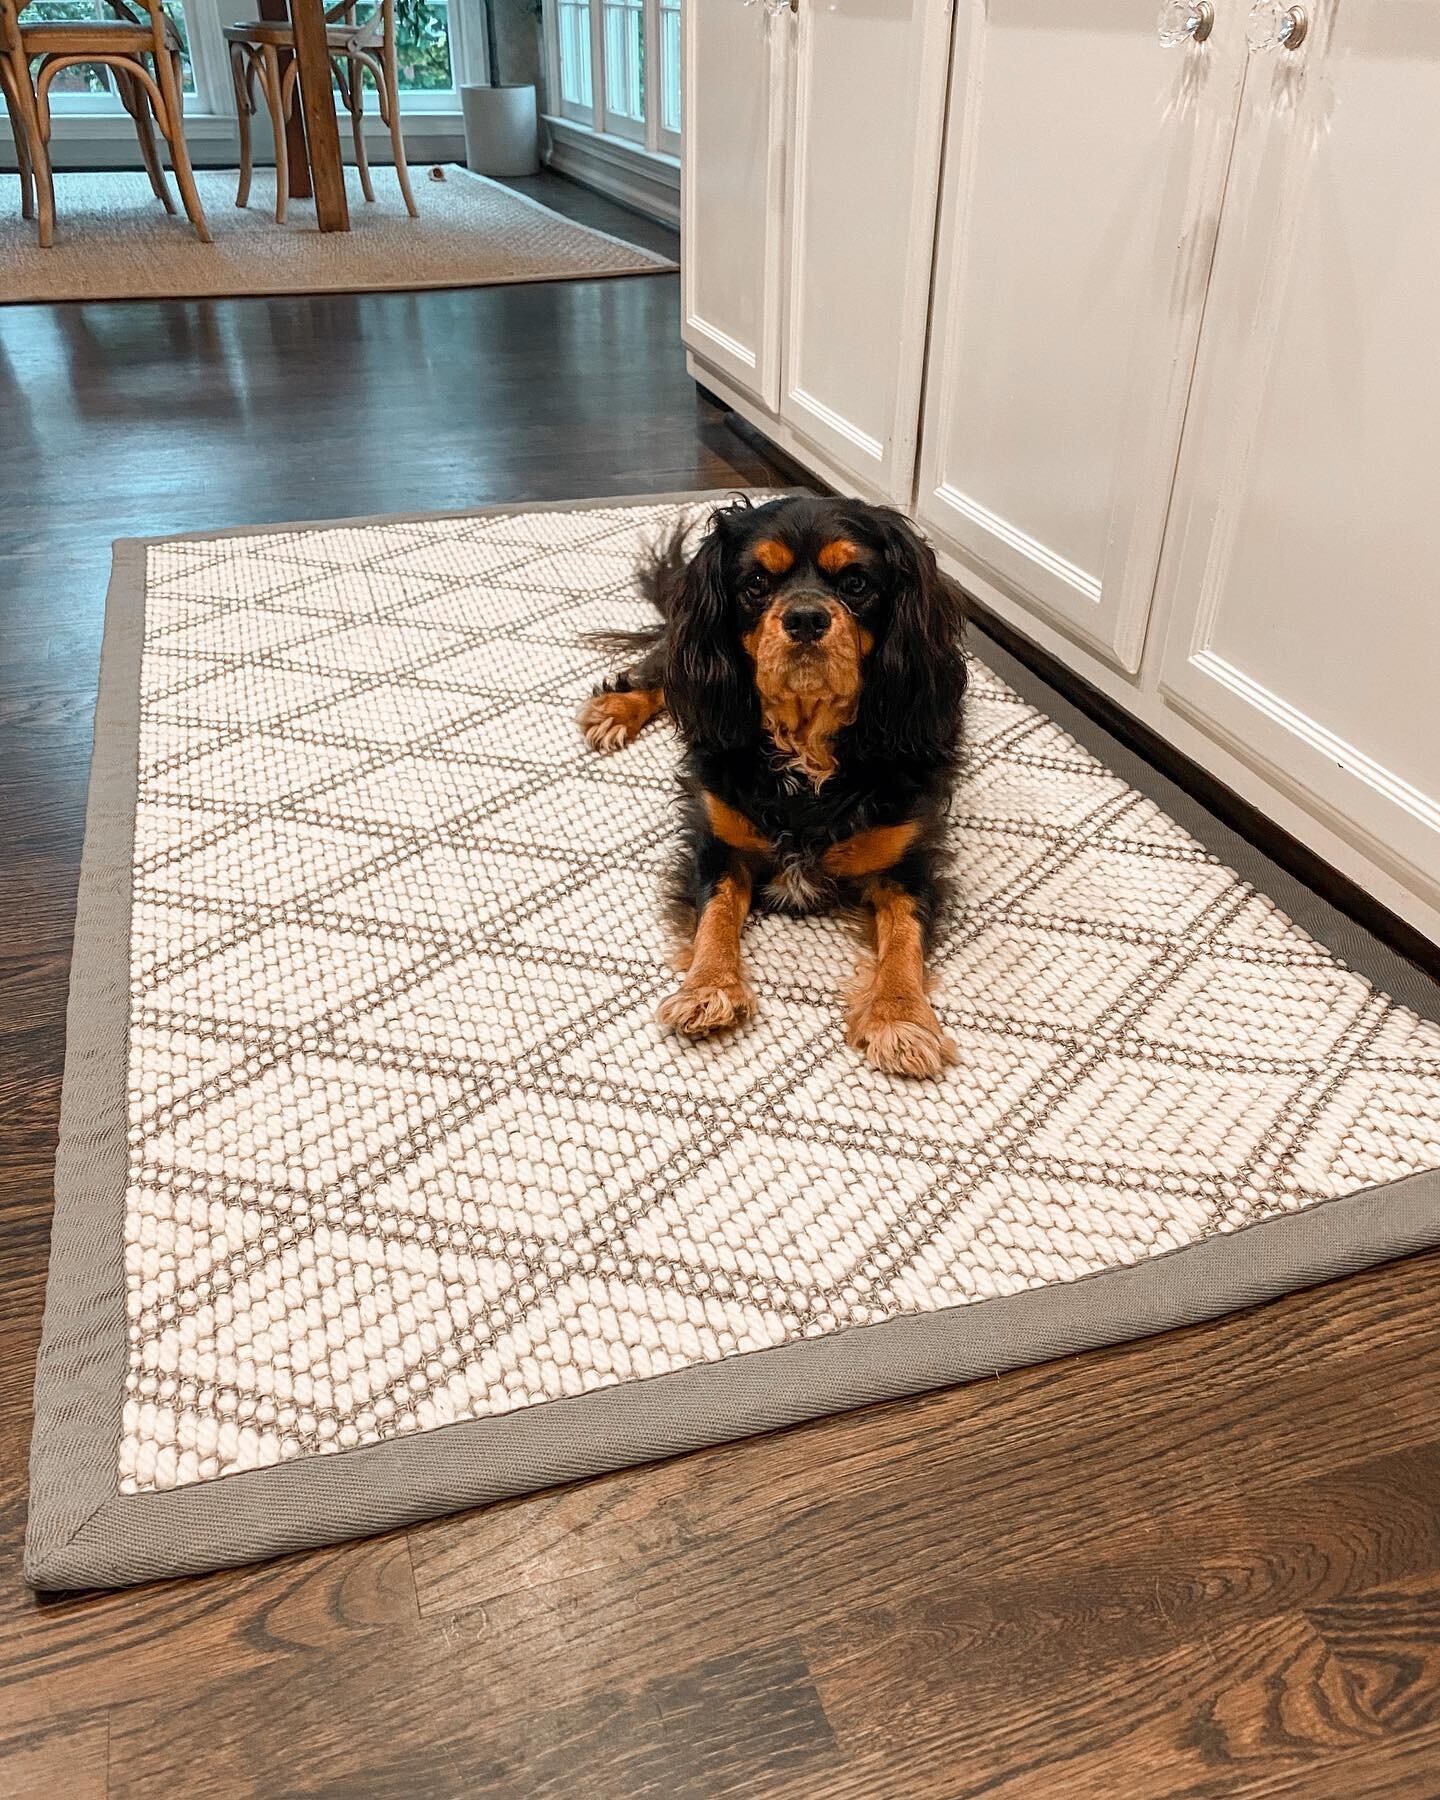 There is a promotion going on with @nourison for these beautiful pre-made stocked rugs. There are 4 sizes available with a few different colors. If you would like more information, send us a DM!😄 #rug #kitchendesign #cavaliersofinstagram #update